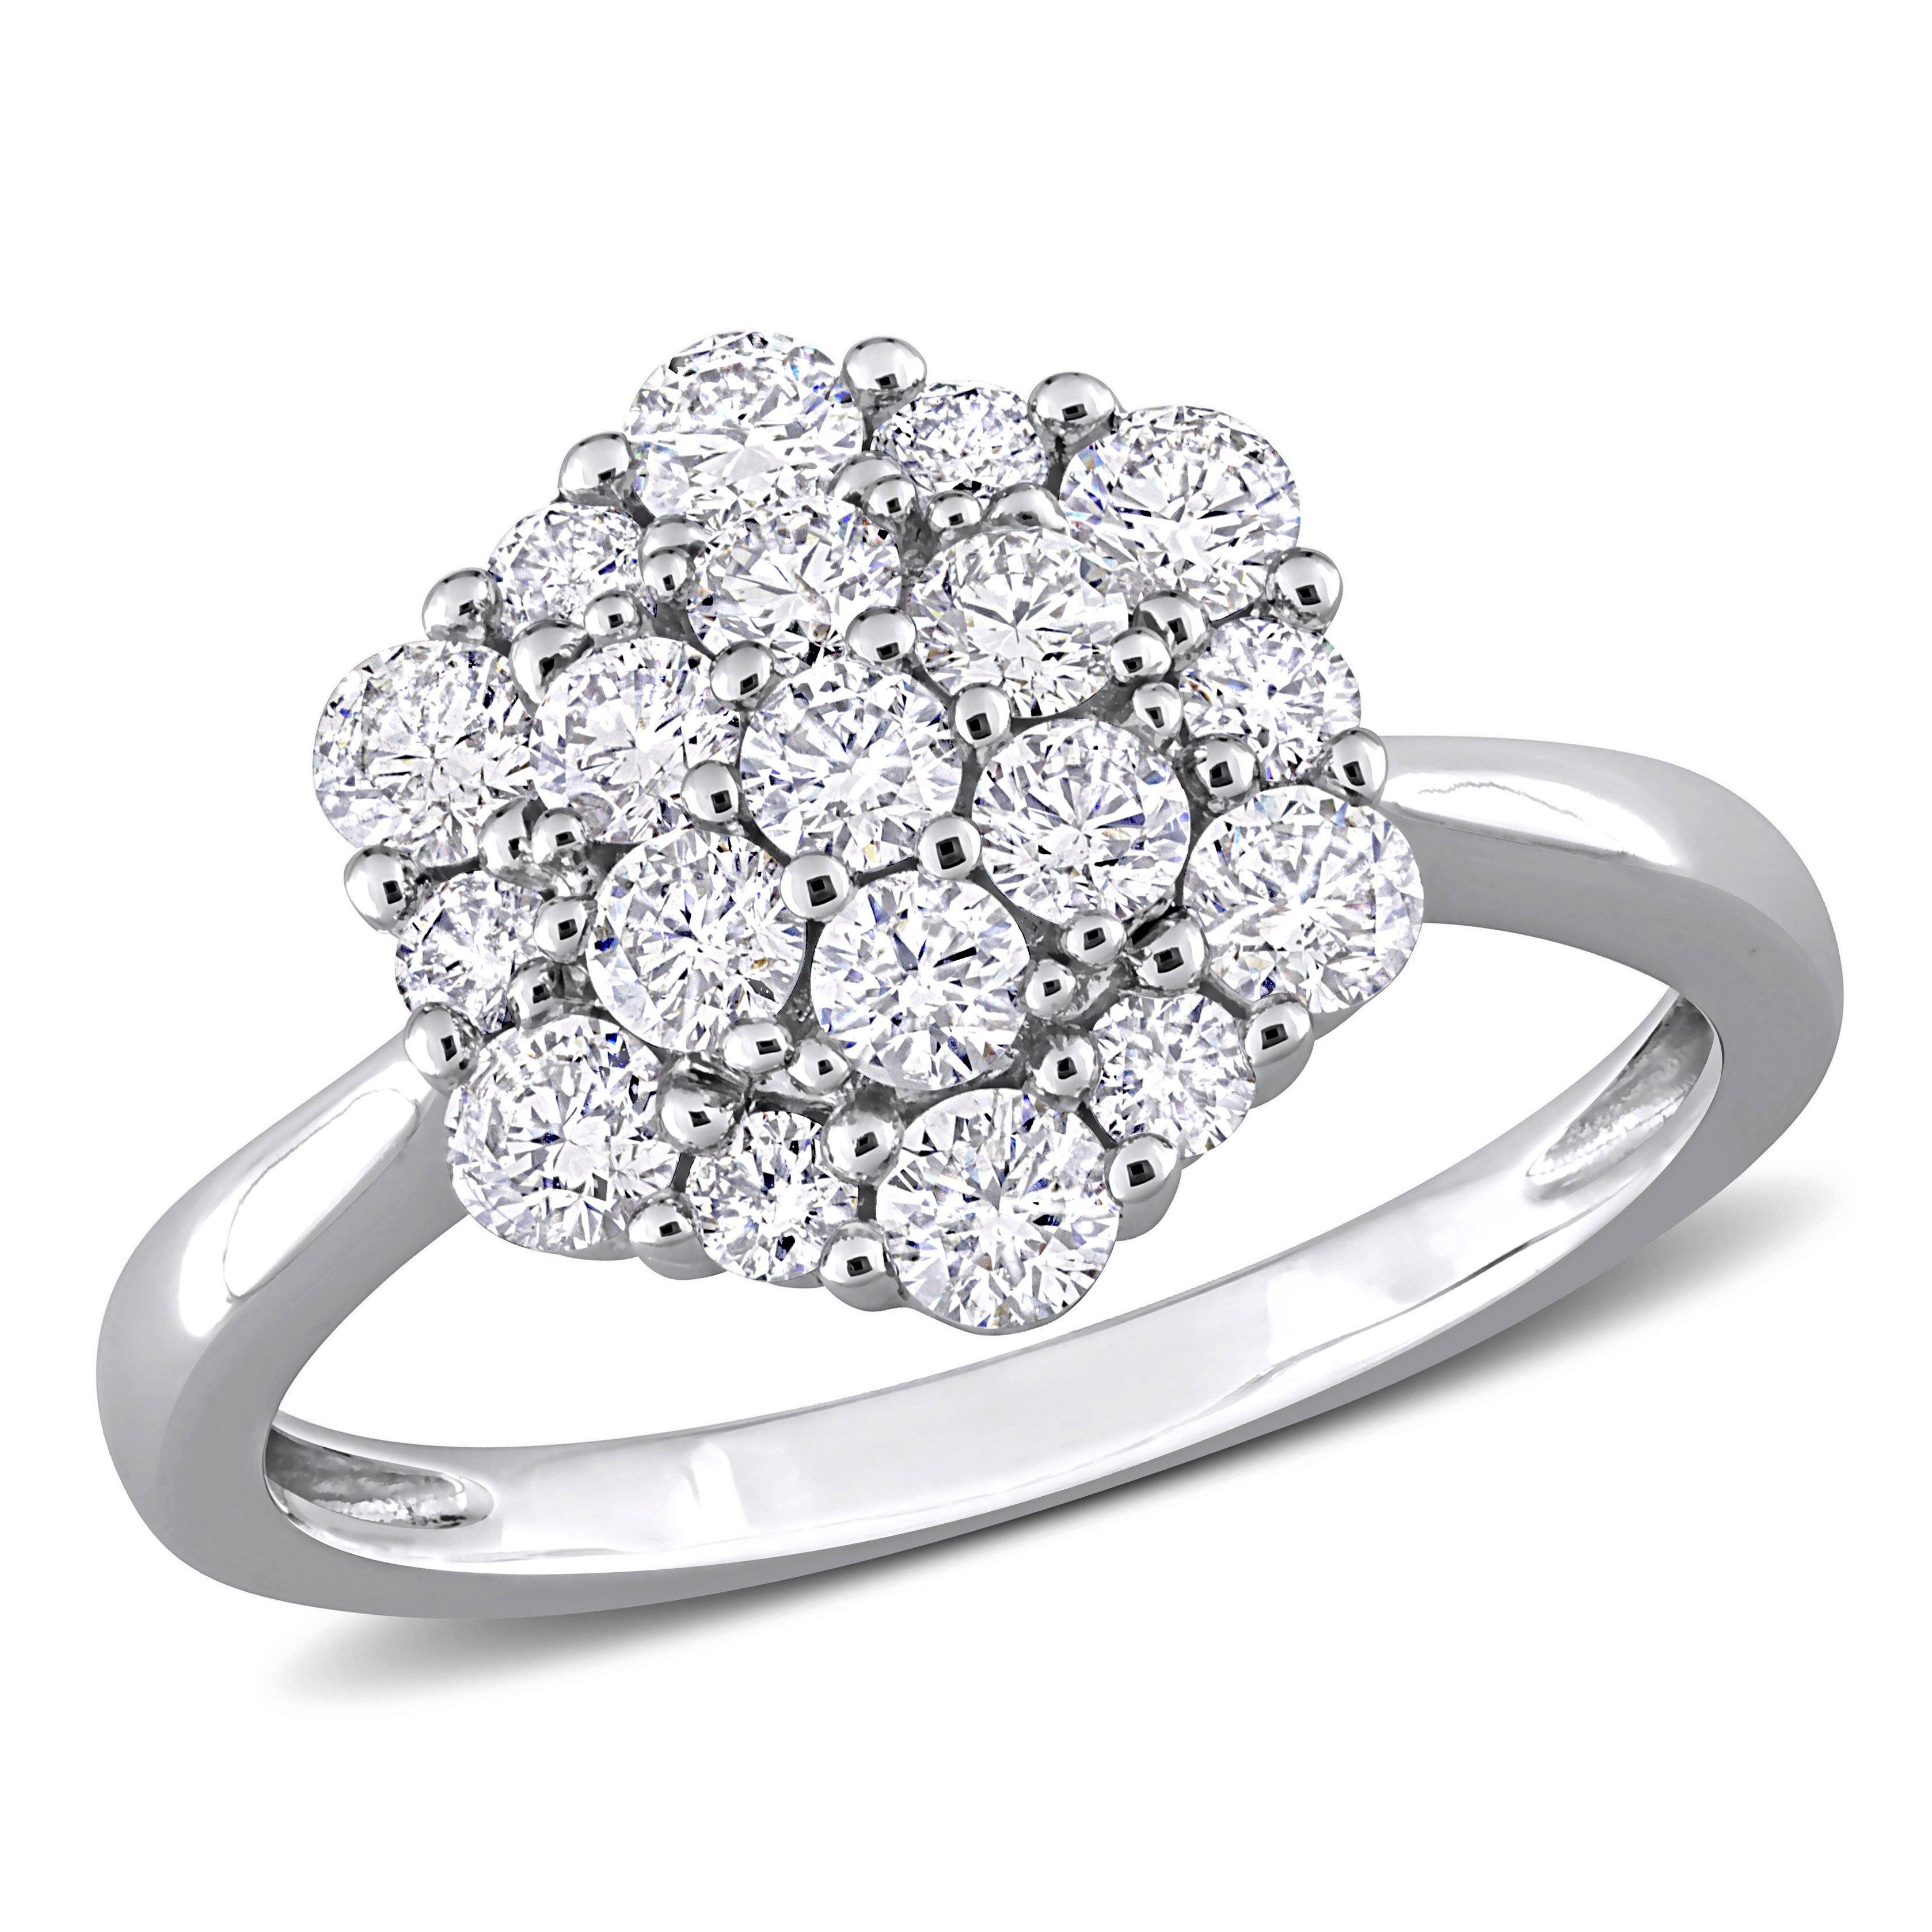 1 CT TW Diamond Cluster Engagement Ring in 10k White Gold